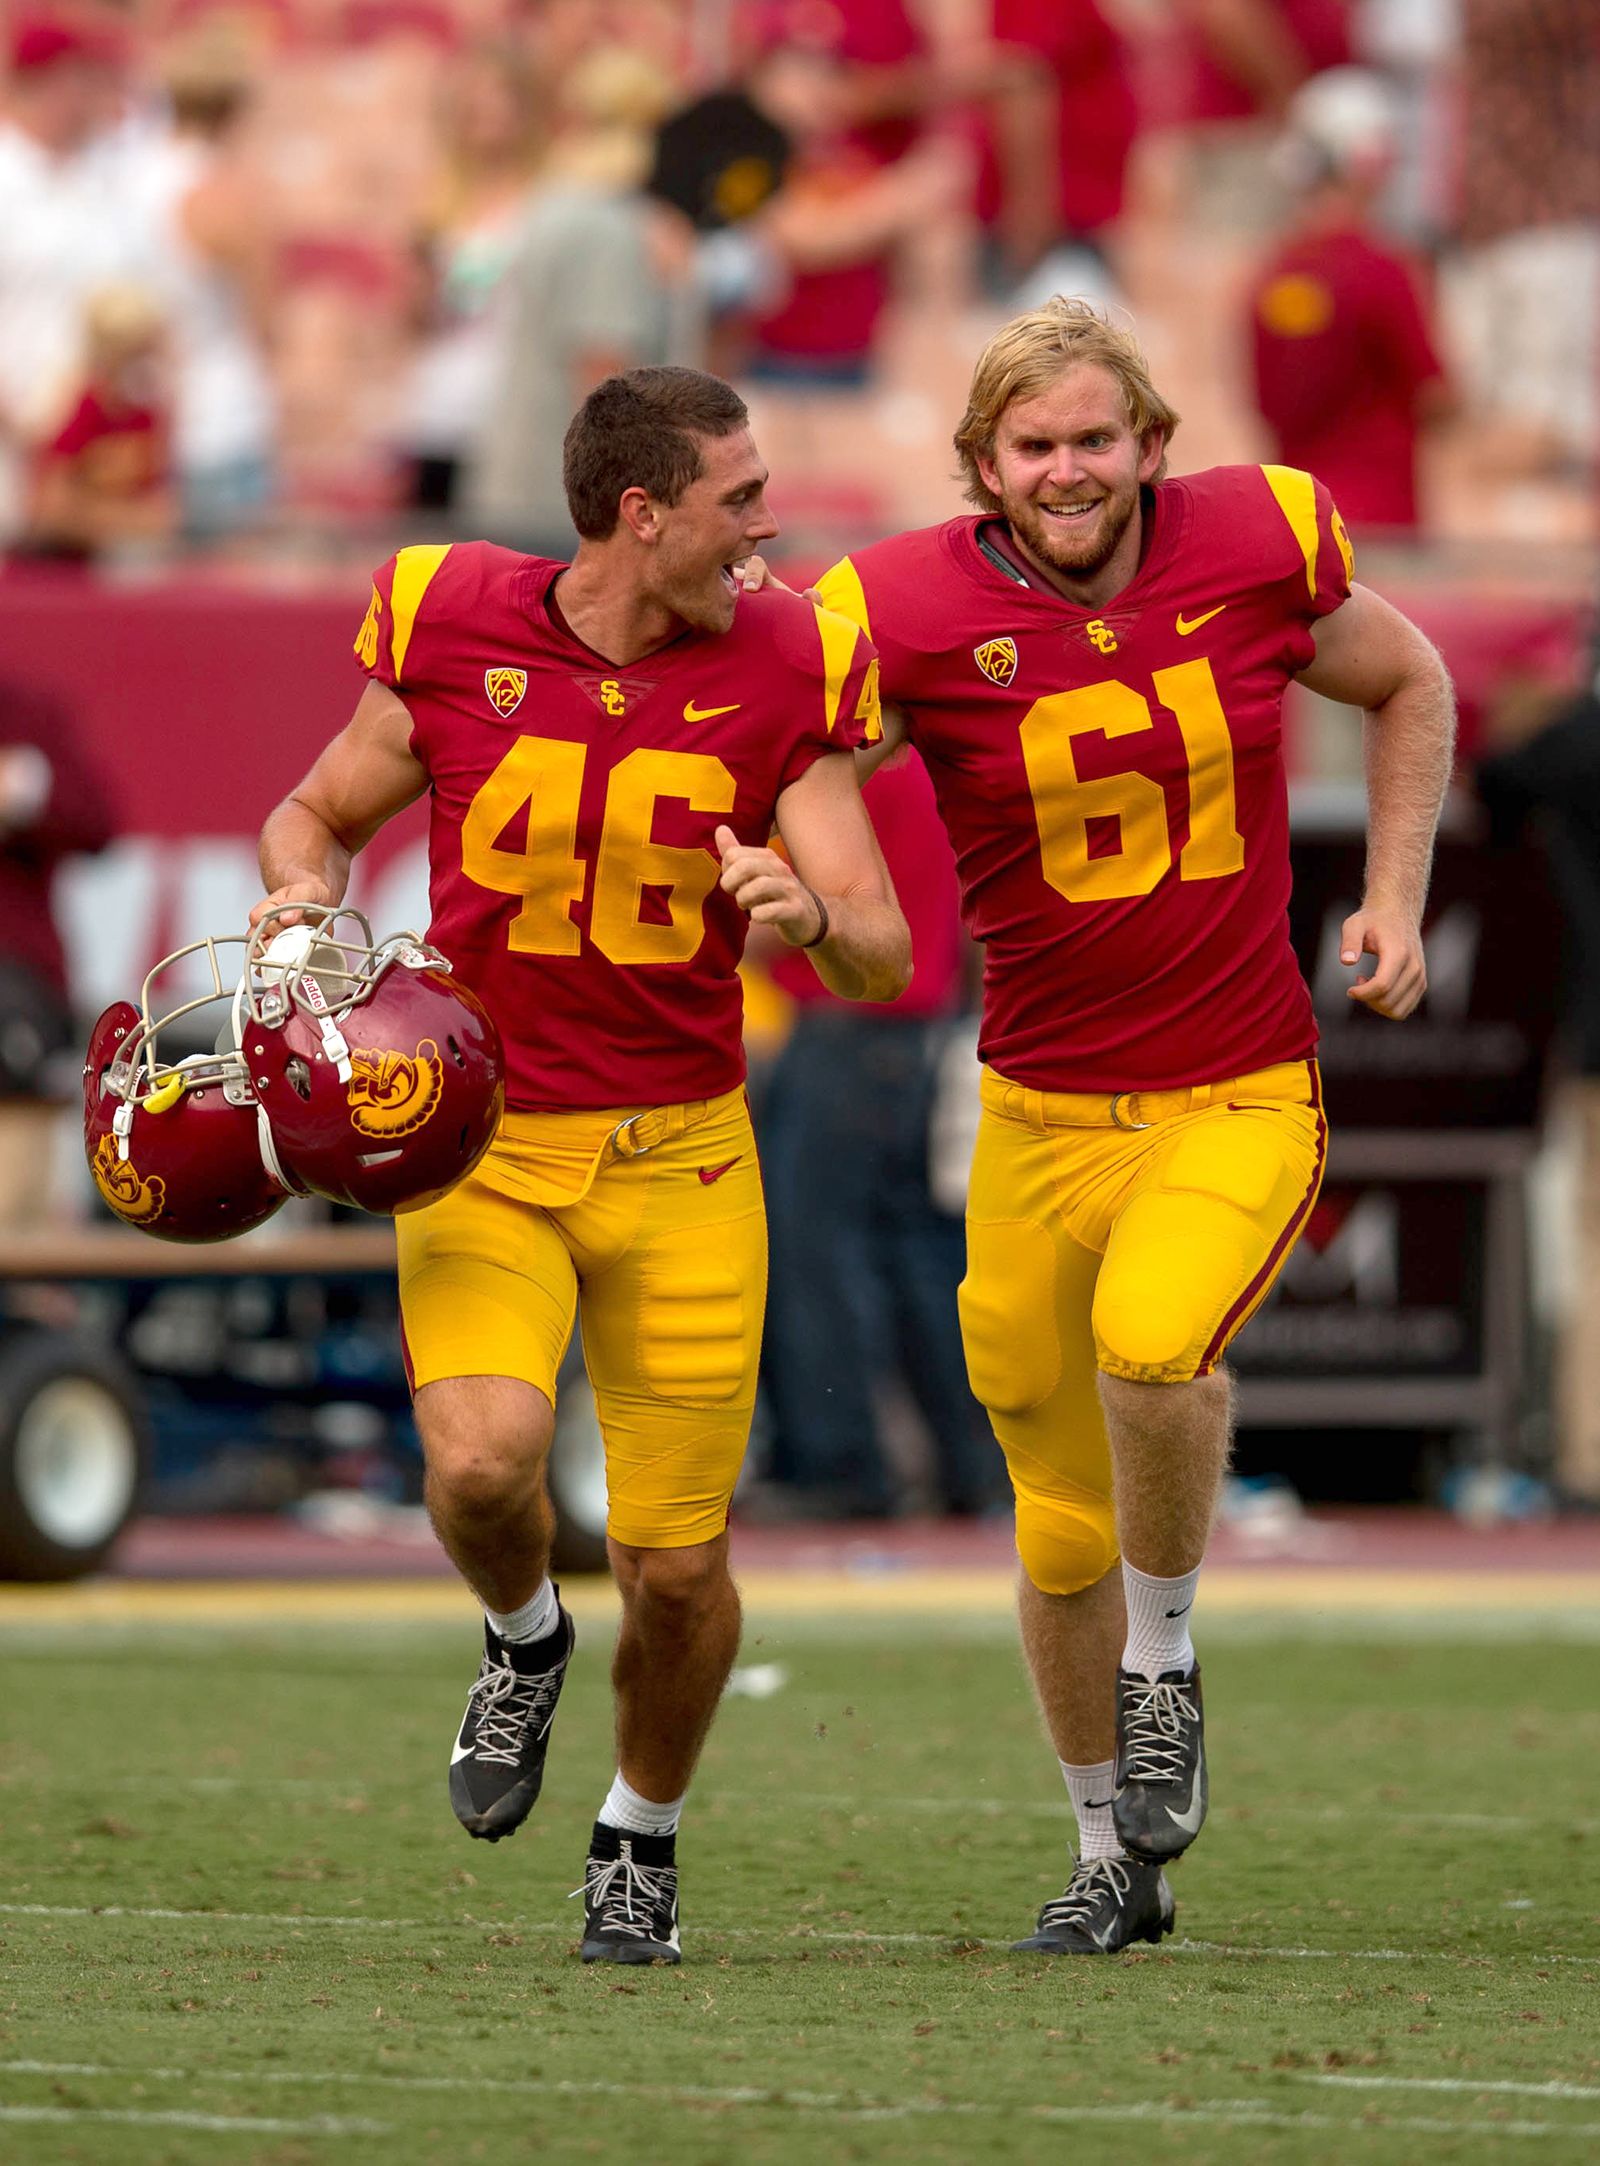 PHOTO: USC long snapper, Jake Olson, right, who has been blind since the age of 12, runs off the field with teammate Wyatt Schmidt after he snapped an extra point.